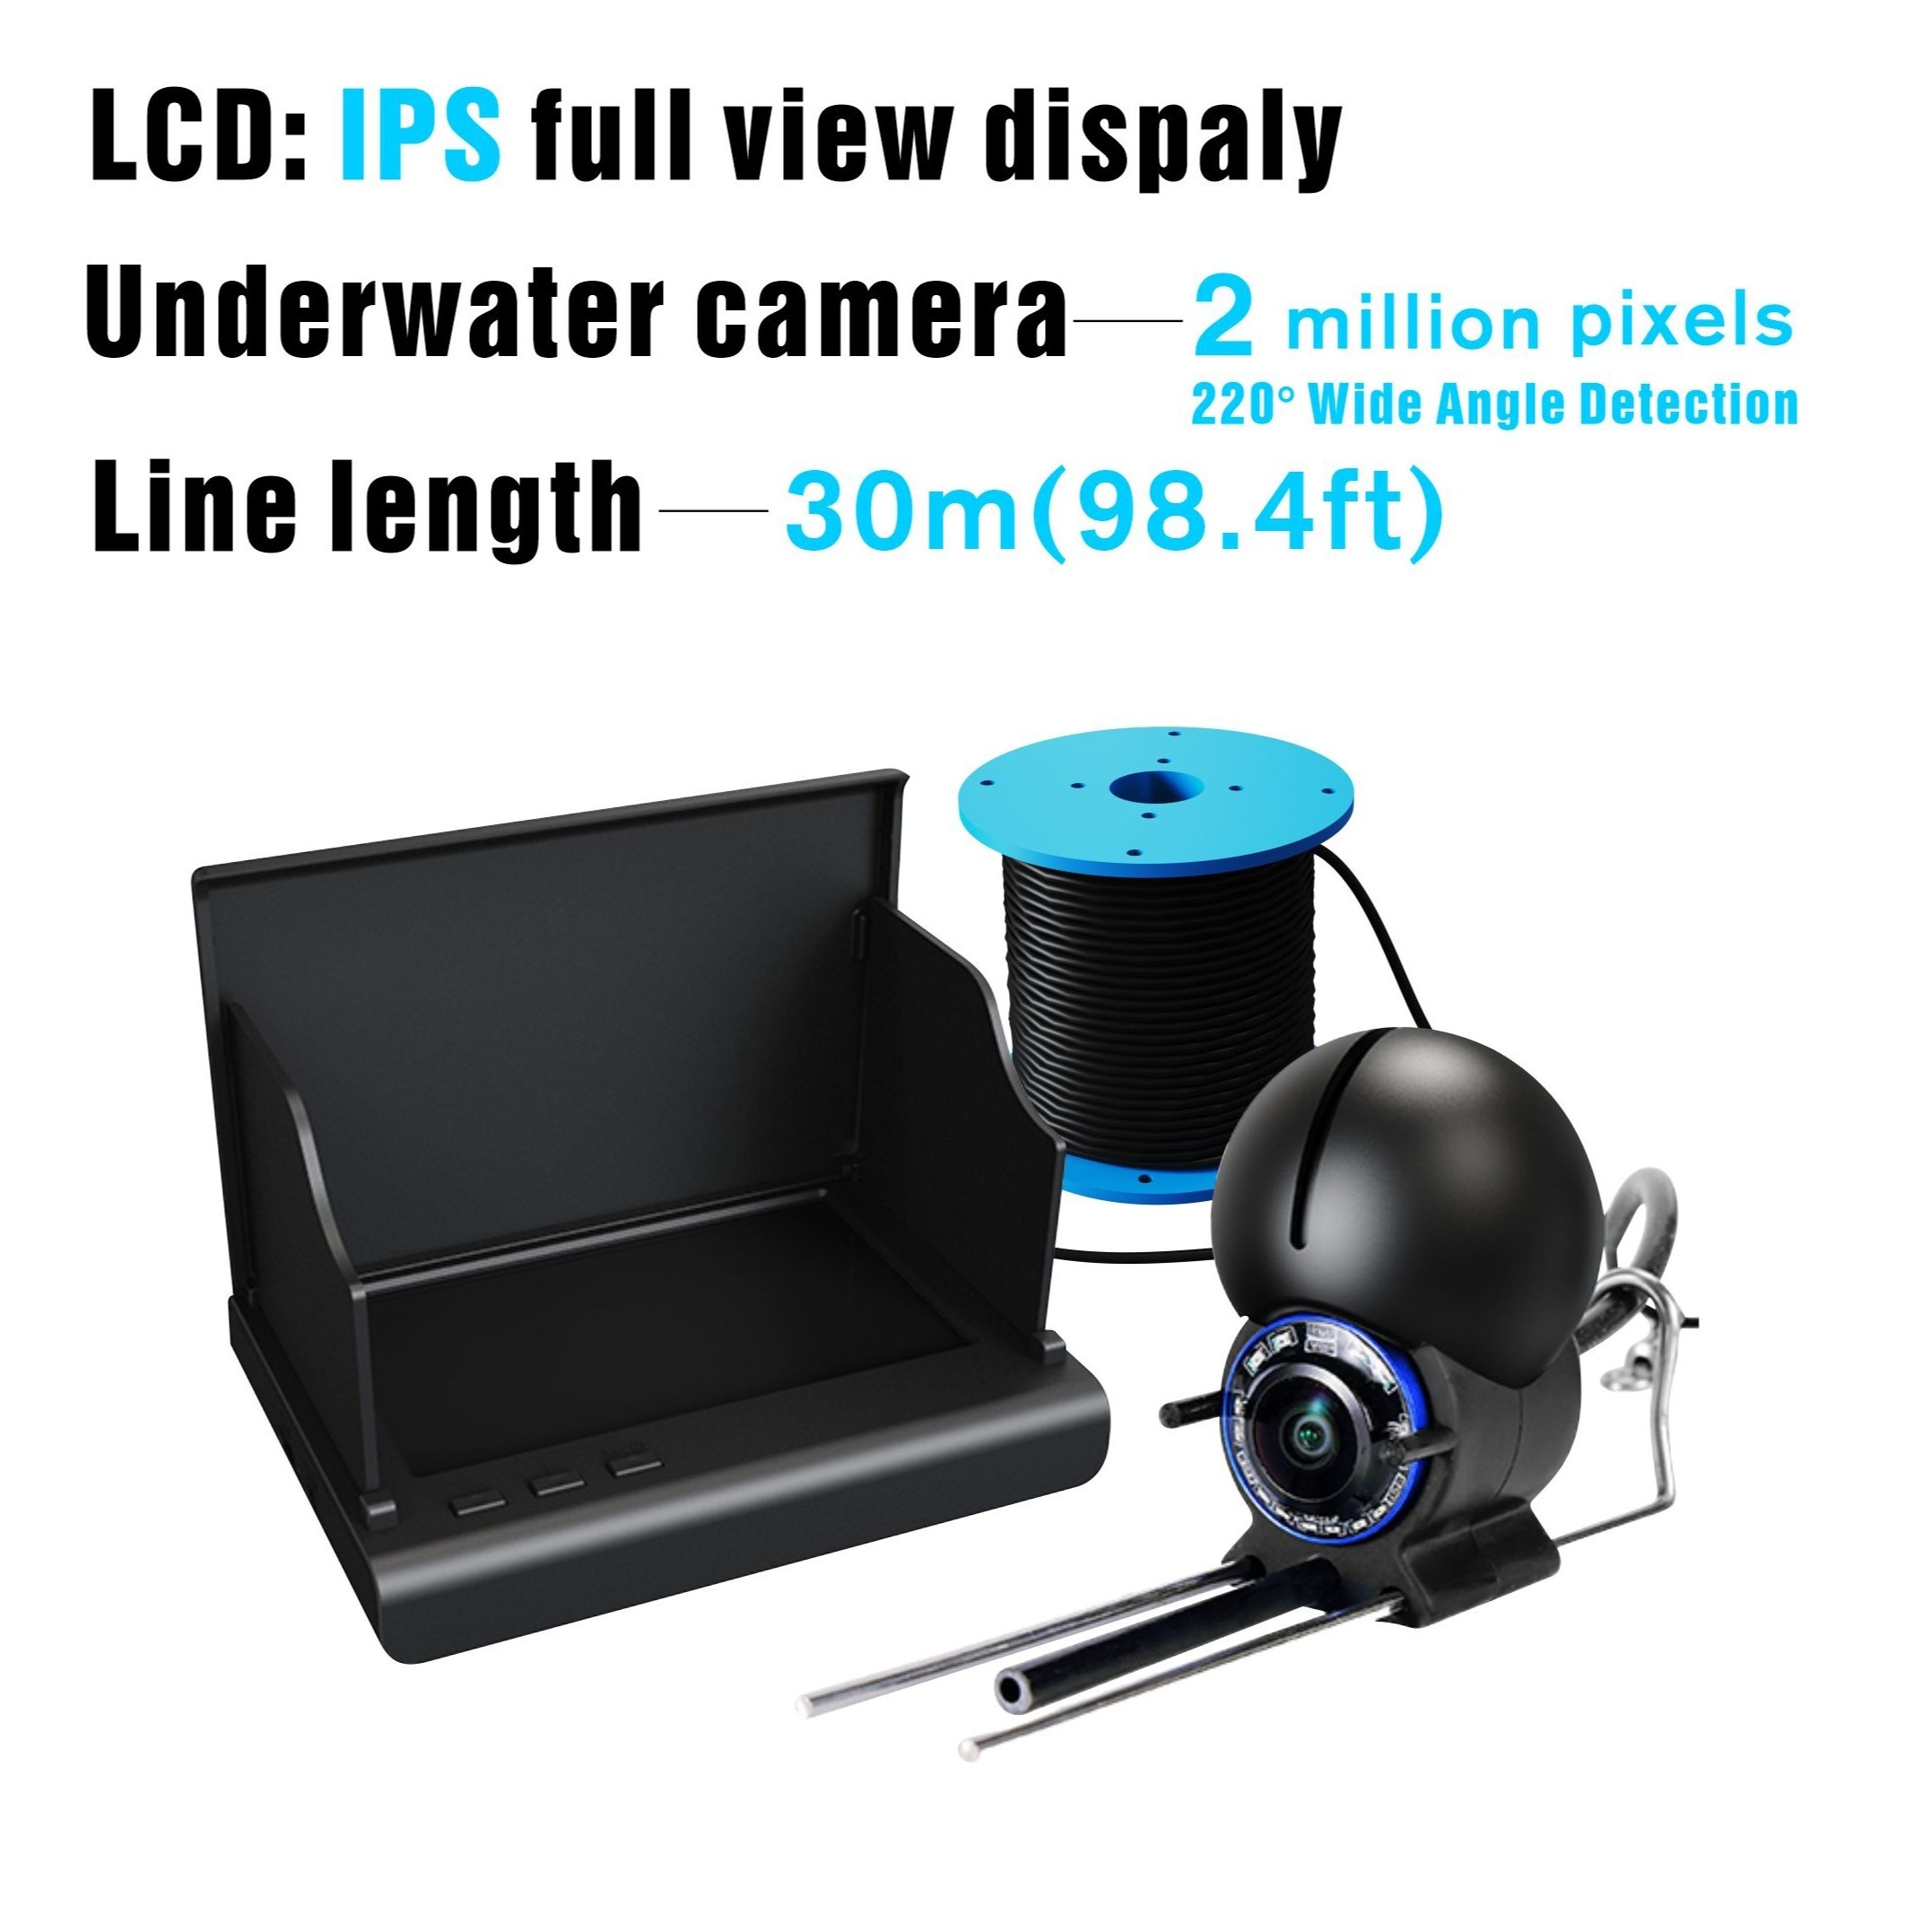 1 Set 1500LUX Underwater Fishing Camera With Infrared LED, 4.3 Inch IPS  Monitor, And 20m/30m Line, Ice Fishing Bracket, 2 Megapixel Wide Angle  Camera